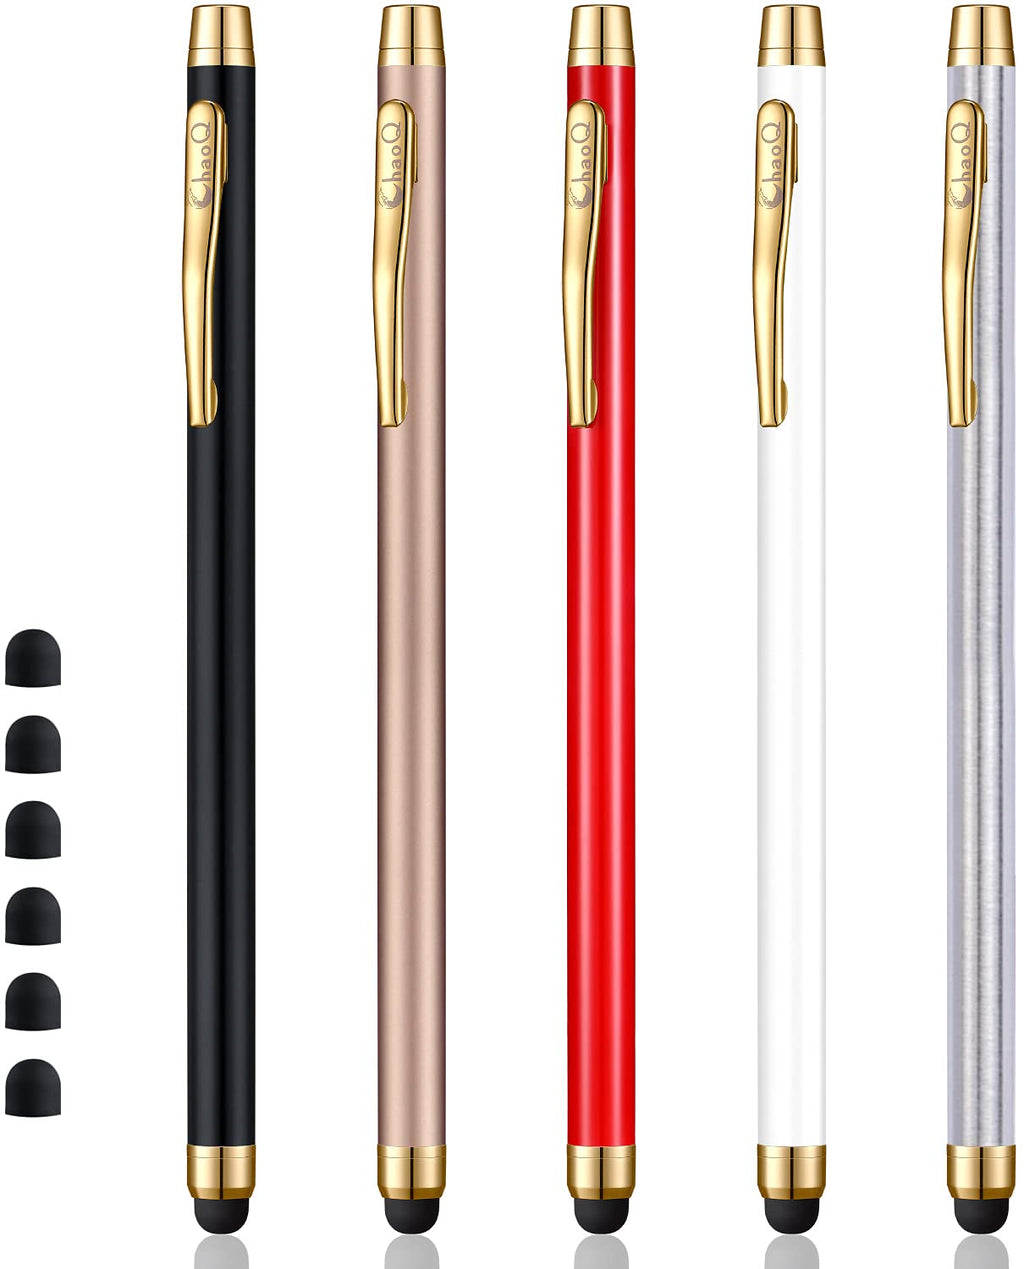  [AUSTRALIA] - Stylus Pens for Touch Screens, ChaoQ Capacitive Stylus (5 Pcs) with 6 Replaceable Tips - Black, White, Silver, Red, Gold 5pcs - Black, White, Silver, Red, Gold